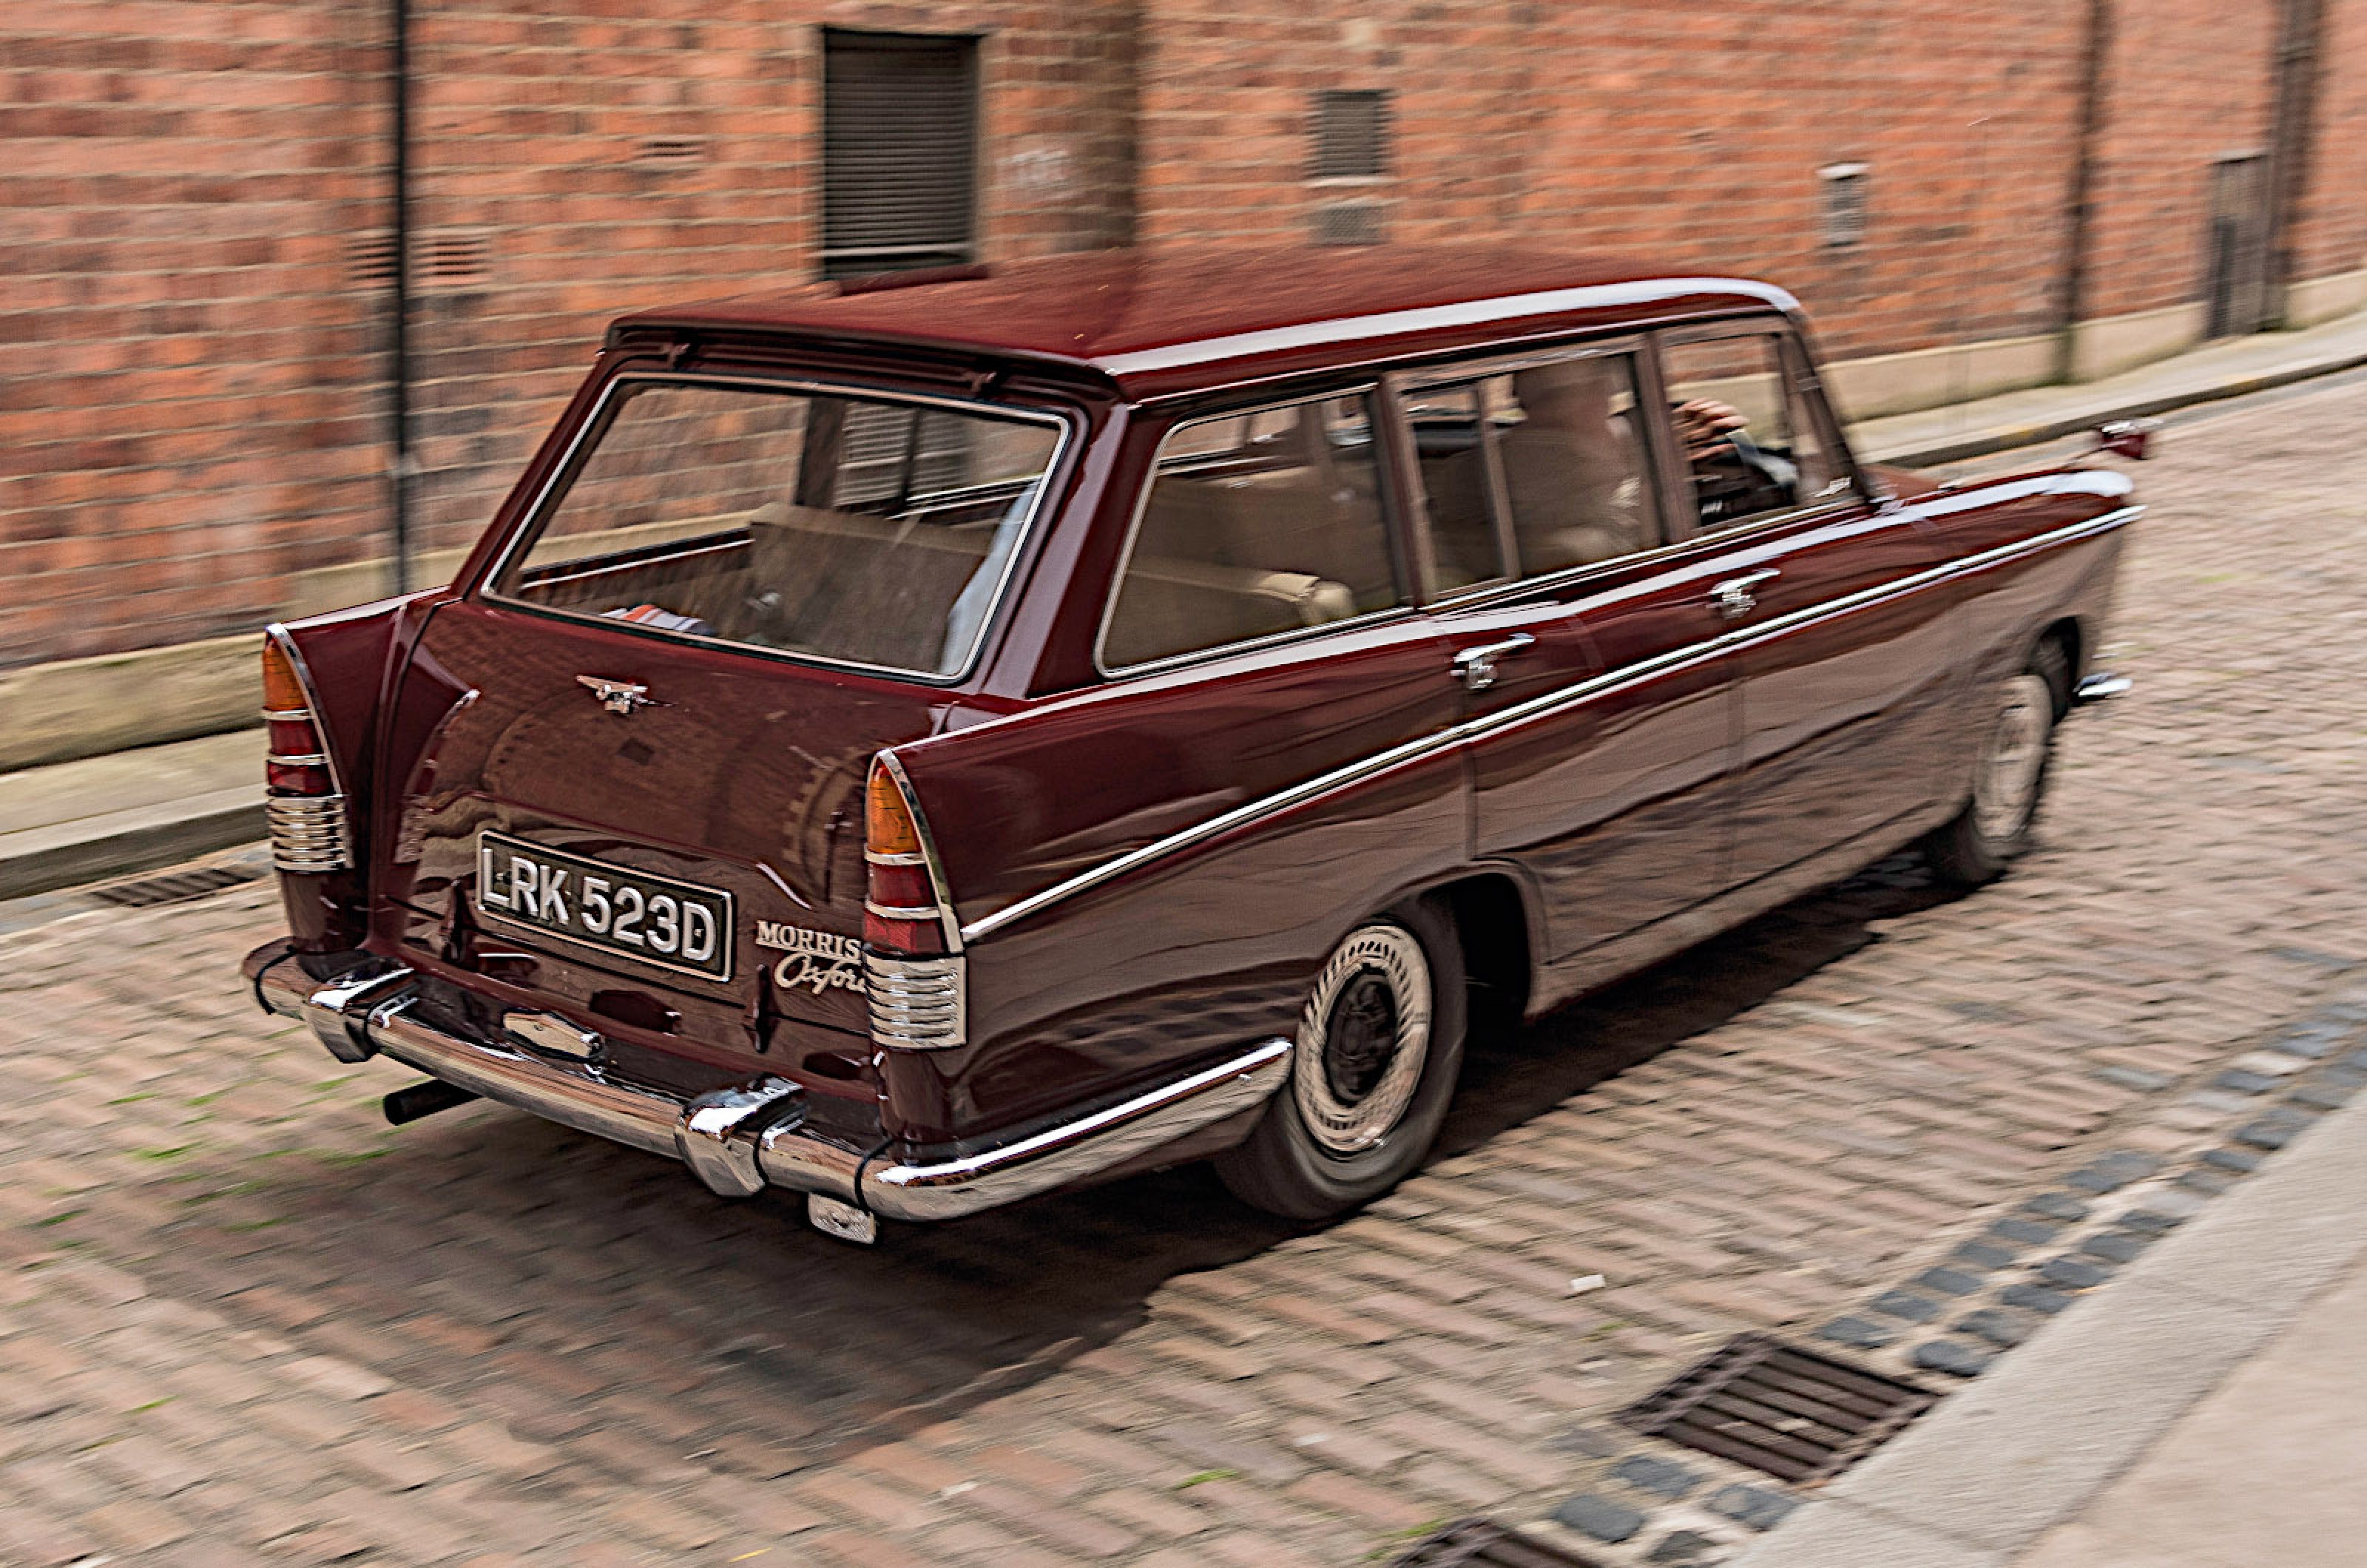 <p>BMC Farina is an umbrella term for a series of mid-sized sedans and station wagons marketed by the related Austin, MG, Morris, Riley and Wolseley marques (Morris Oxford Traveller pictured).</p>  <p>Although there were detail styling differences, the bodies were all the same, and were designed by Pininfarina.</p>  <p>Pininfarina, of course, is Italian rather than American, but the US trend for tailfins had become well established in Europe by now, and these cars all had them.</p>  <p>That trend soon faded, and after a redesign in 1961 the fins on the BMC cars were considerably smaller.</p>